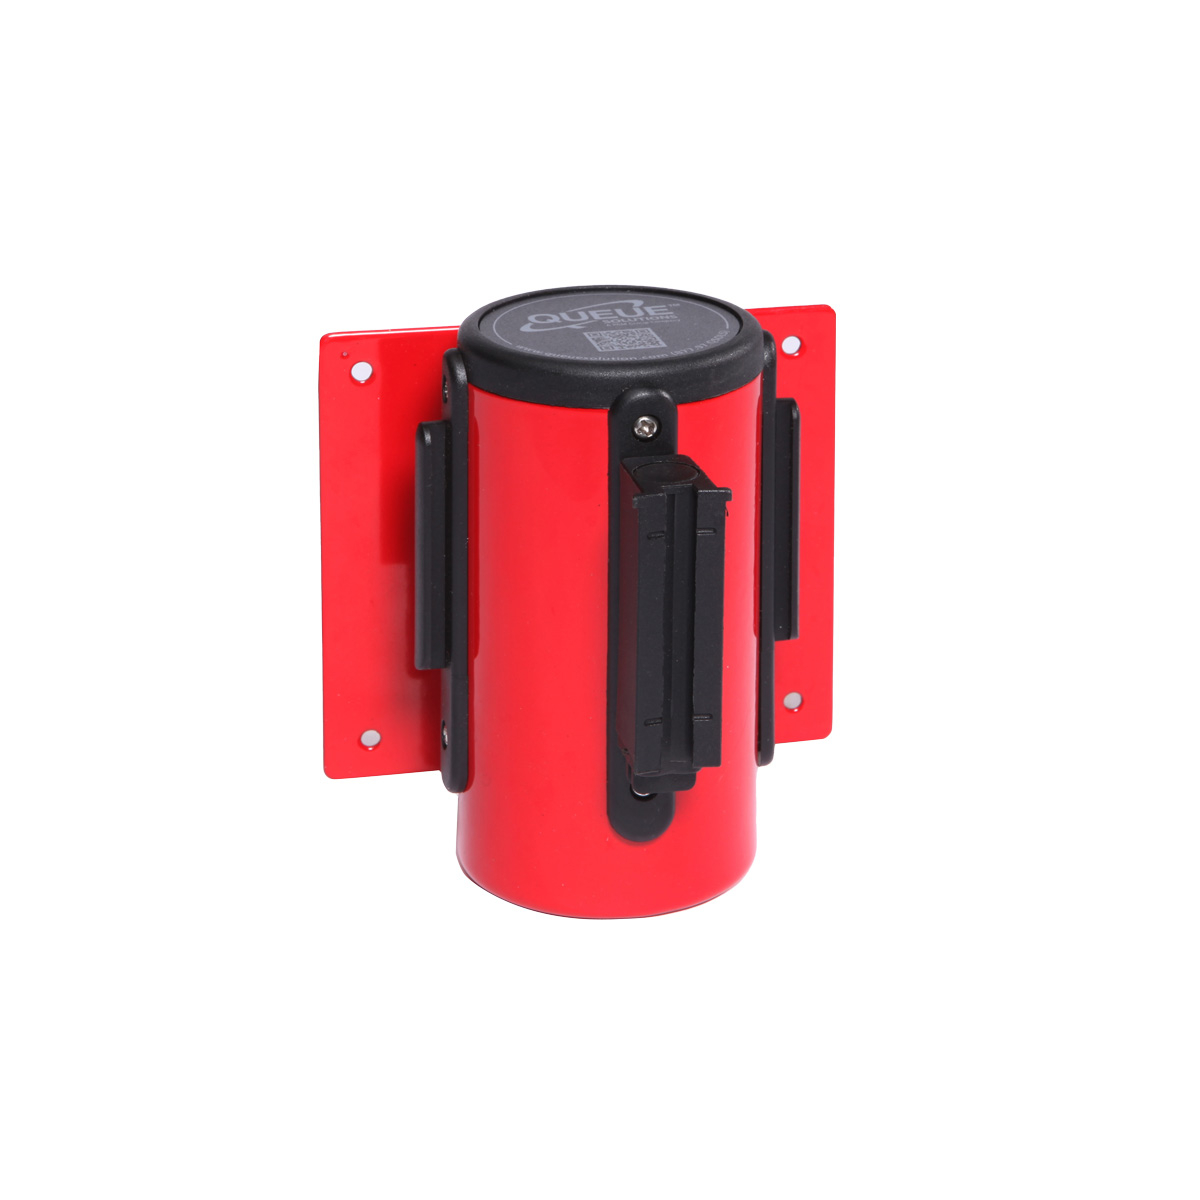 WallMaster Wall Mounted Retractable Barriers Red Cassette - Has Internal Belt Brake For Safe & Slow Retract